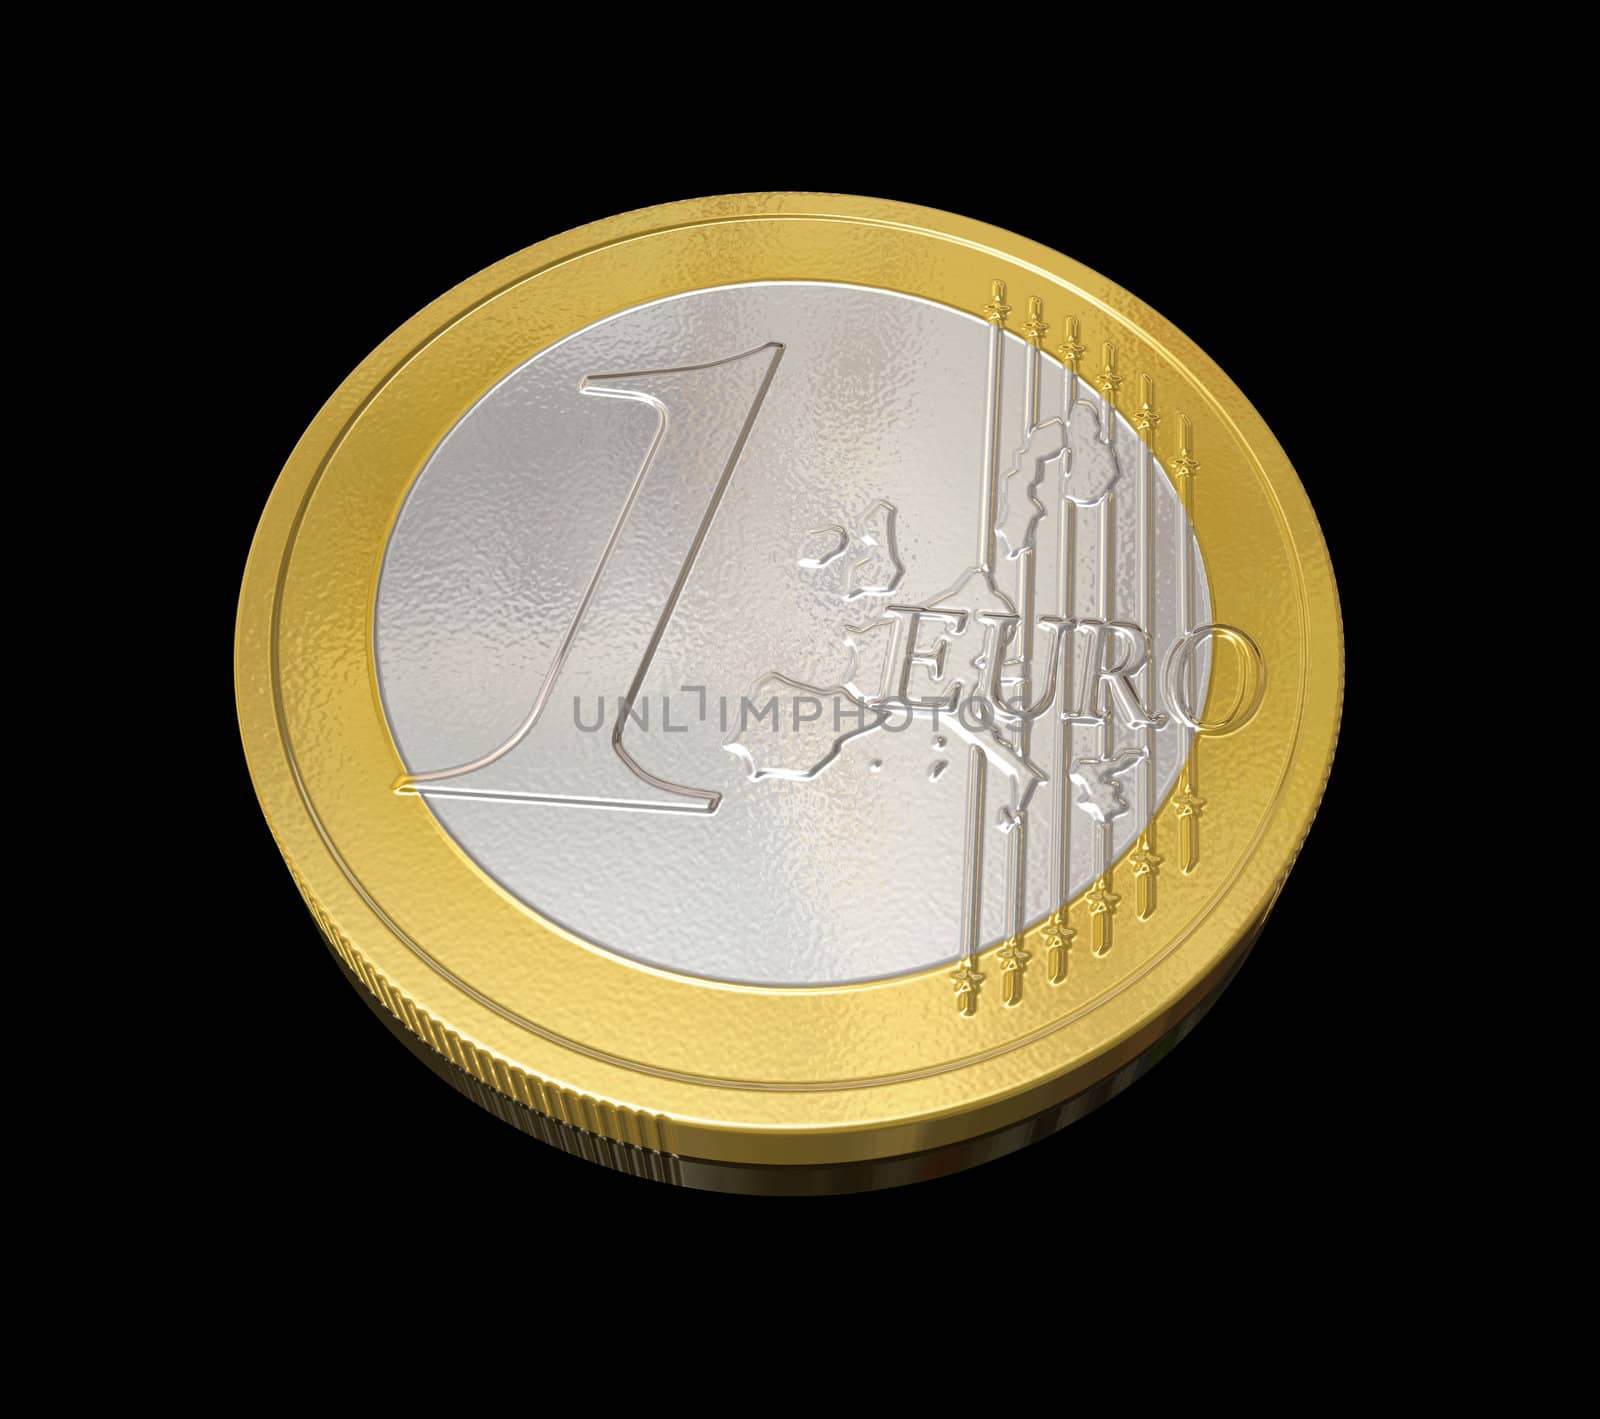 One euro coin by daboost